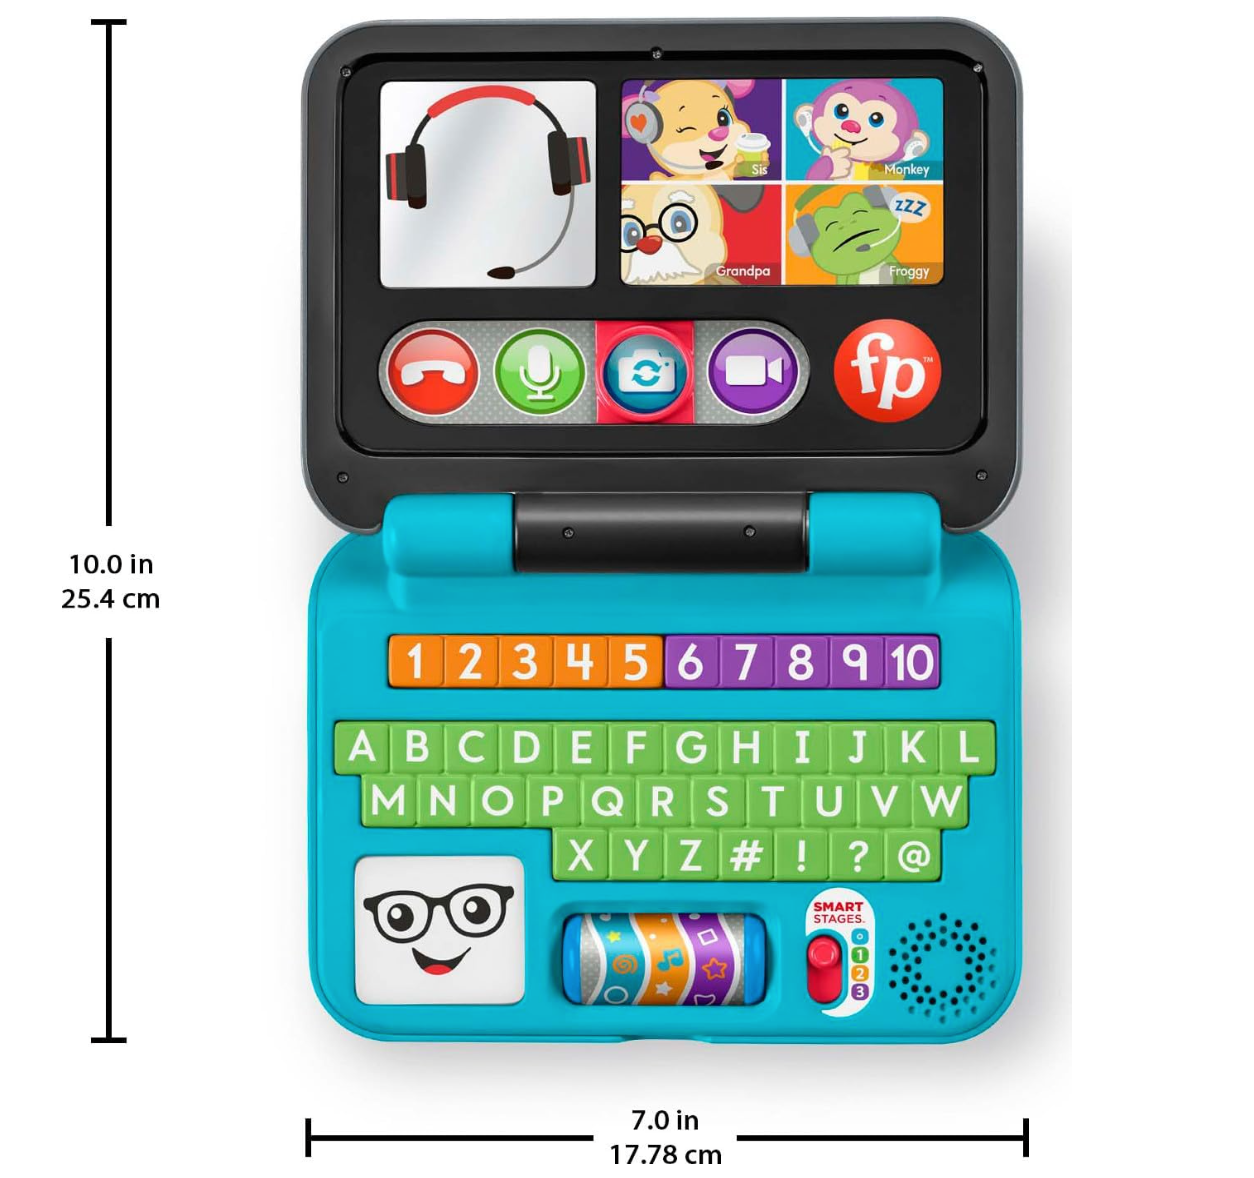 Fisher-Price Laugh & Learn Baby to Toddler Toy Let's Connect Laptop Pretend Computer with Smart Stages for Ages 6+ Months